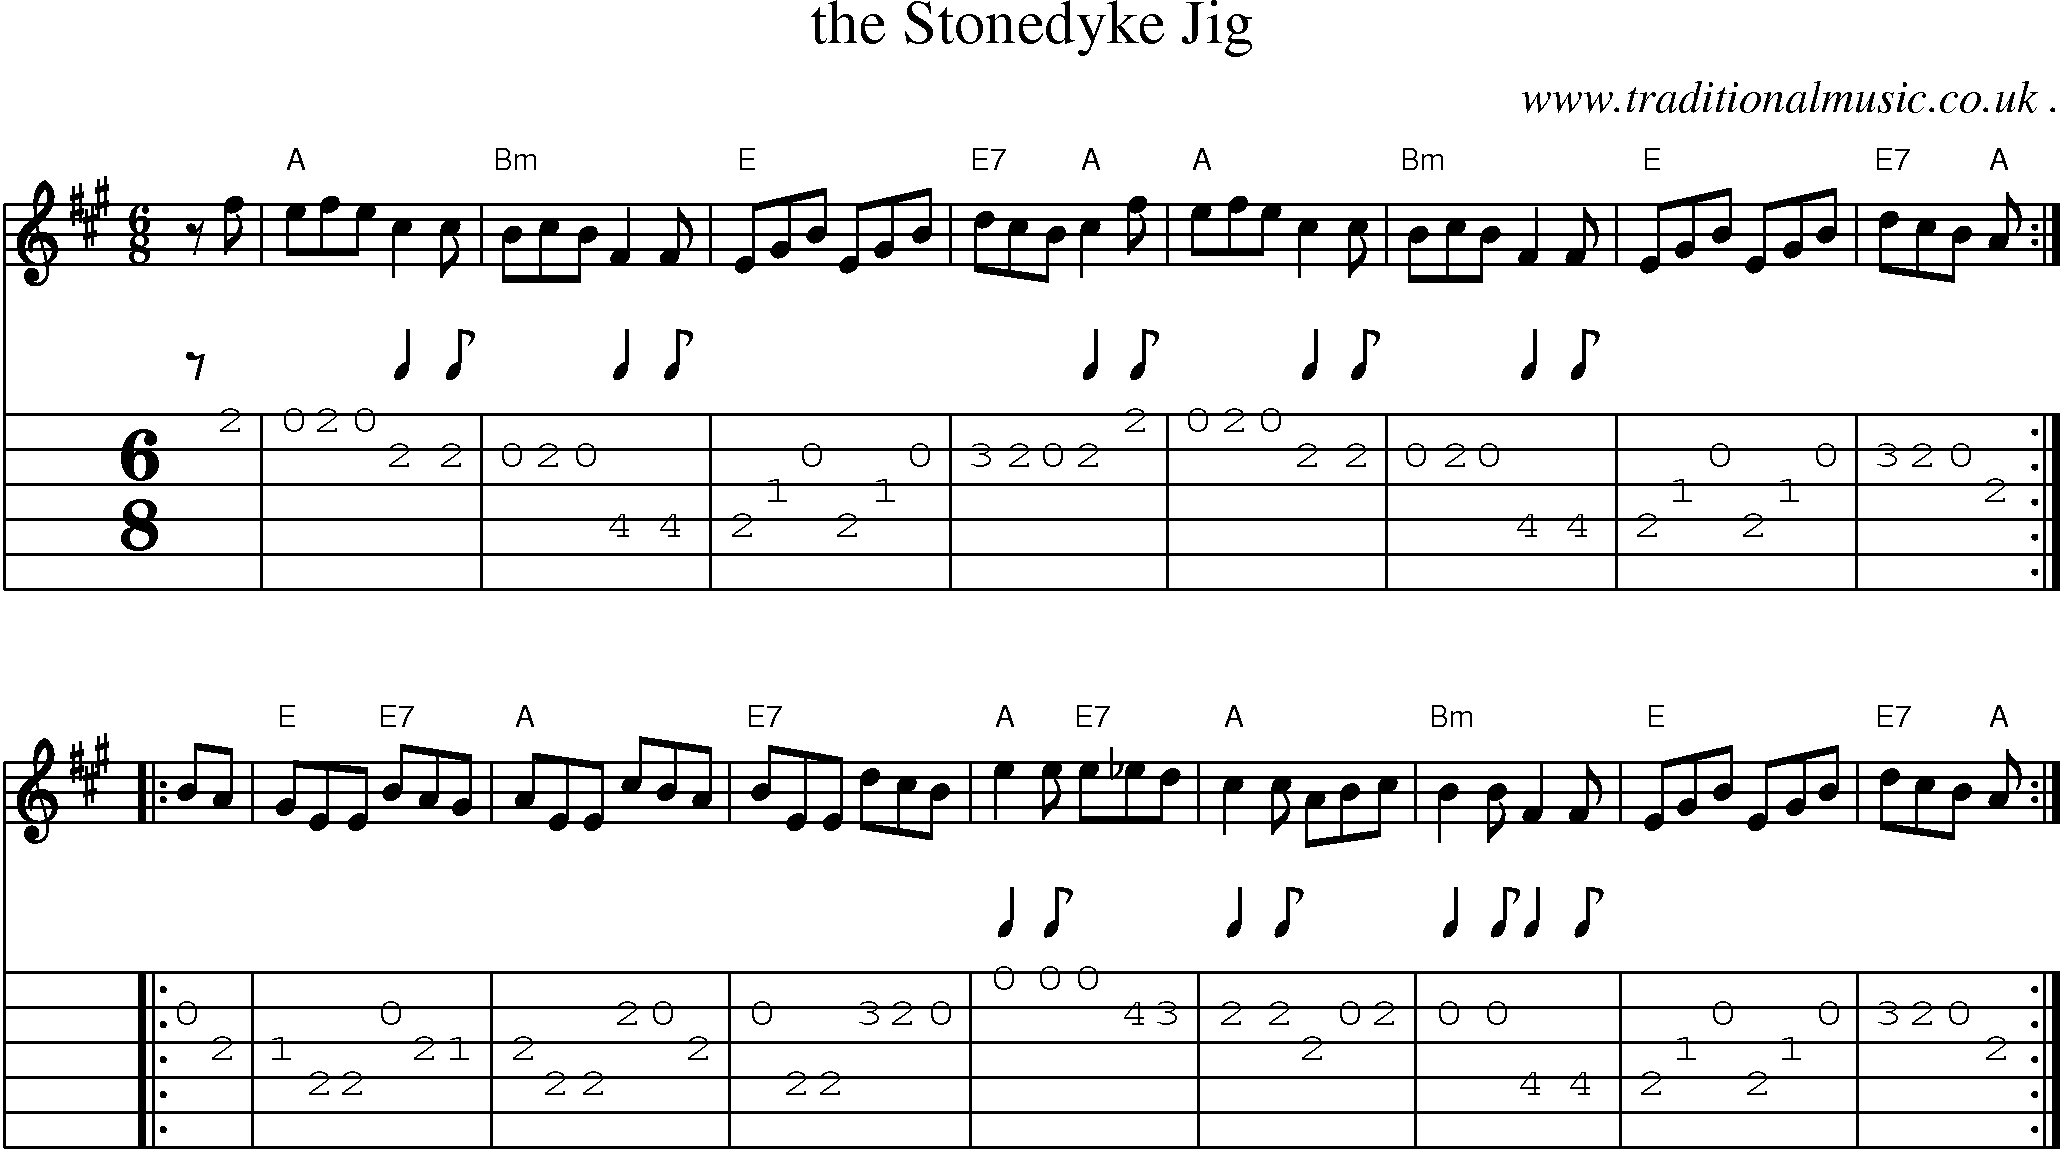 Sheet-music  score, Chords and Guitar Tabs for The Stonedyke Jig